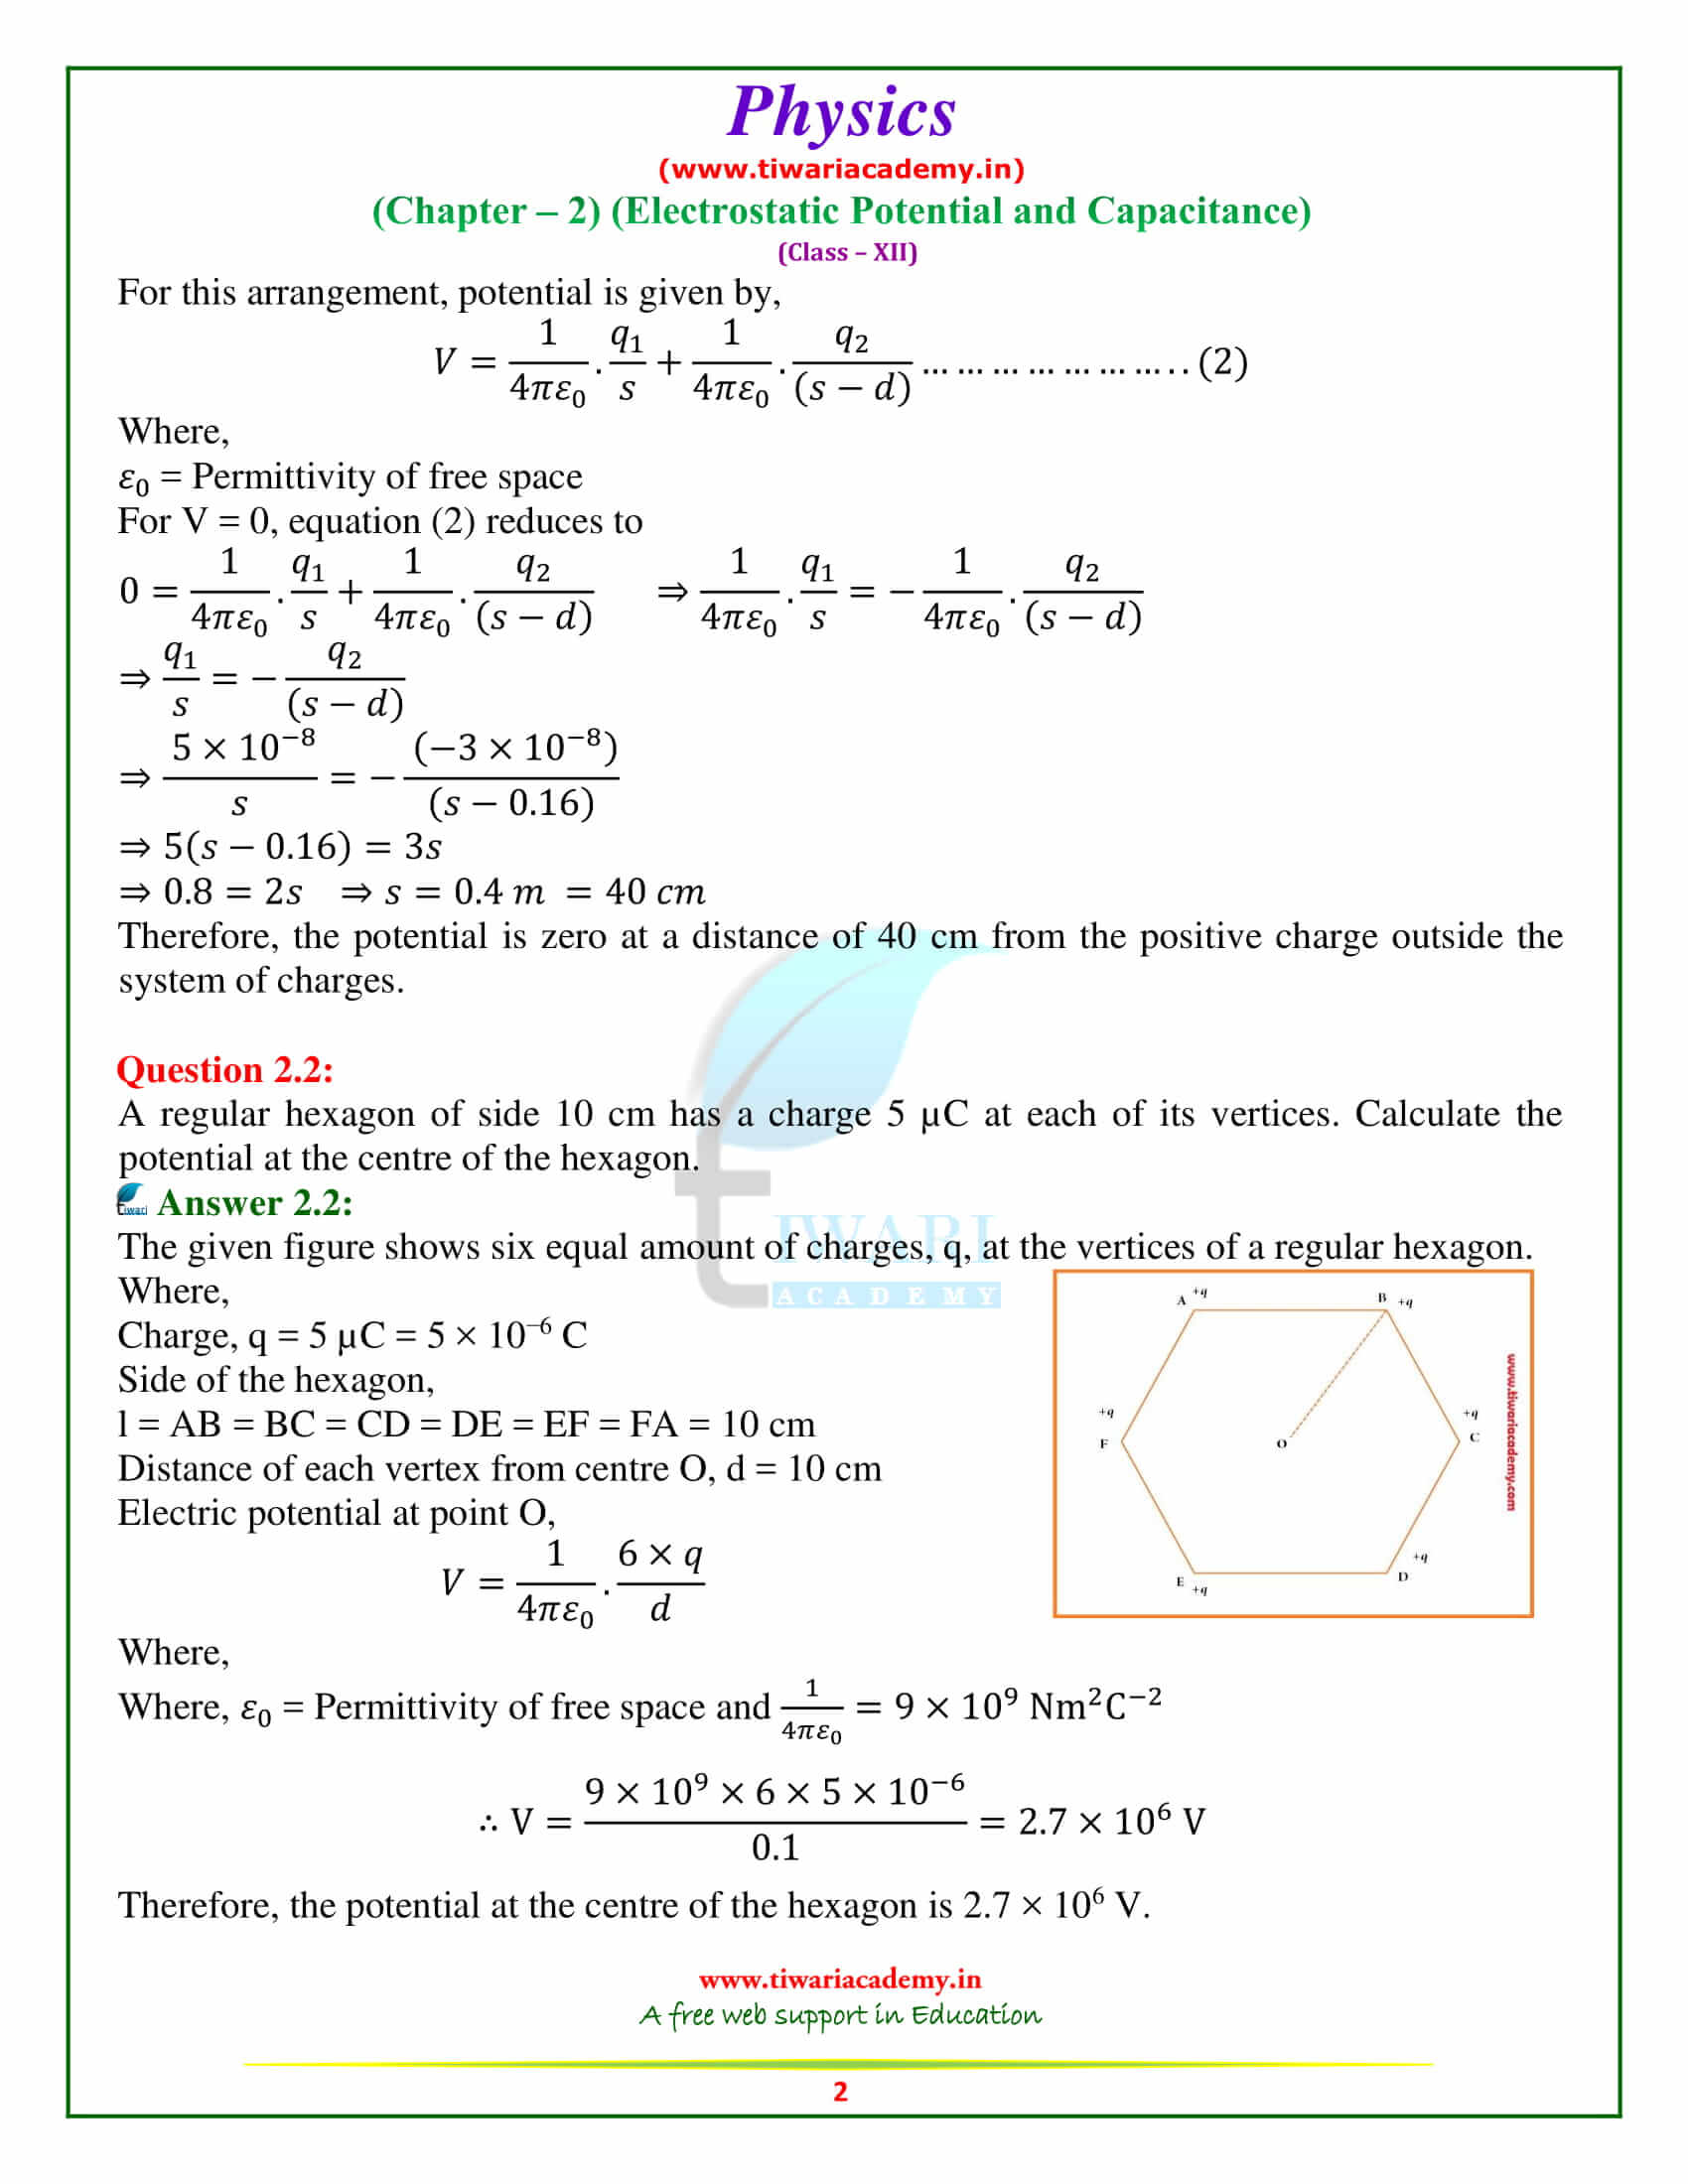 NCERT Solutions for Class 12 Physics Chapter 2 Electrostatic Potential and Capacitance in pdf form